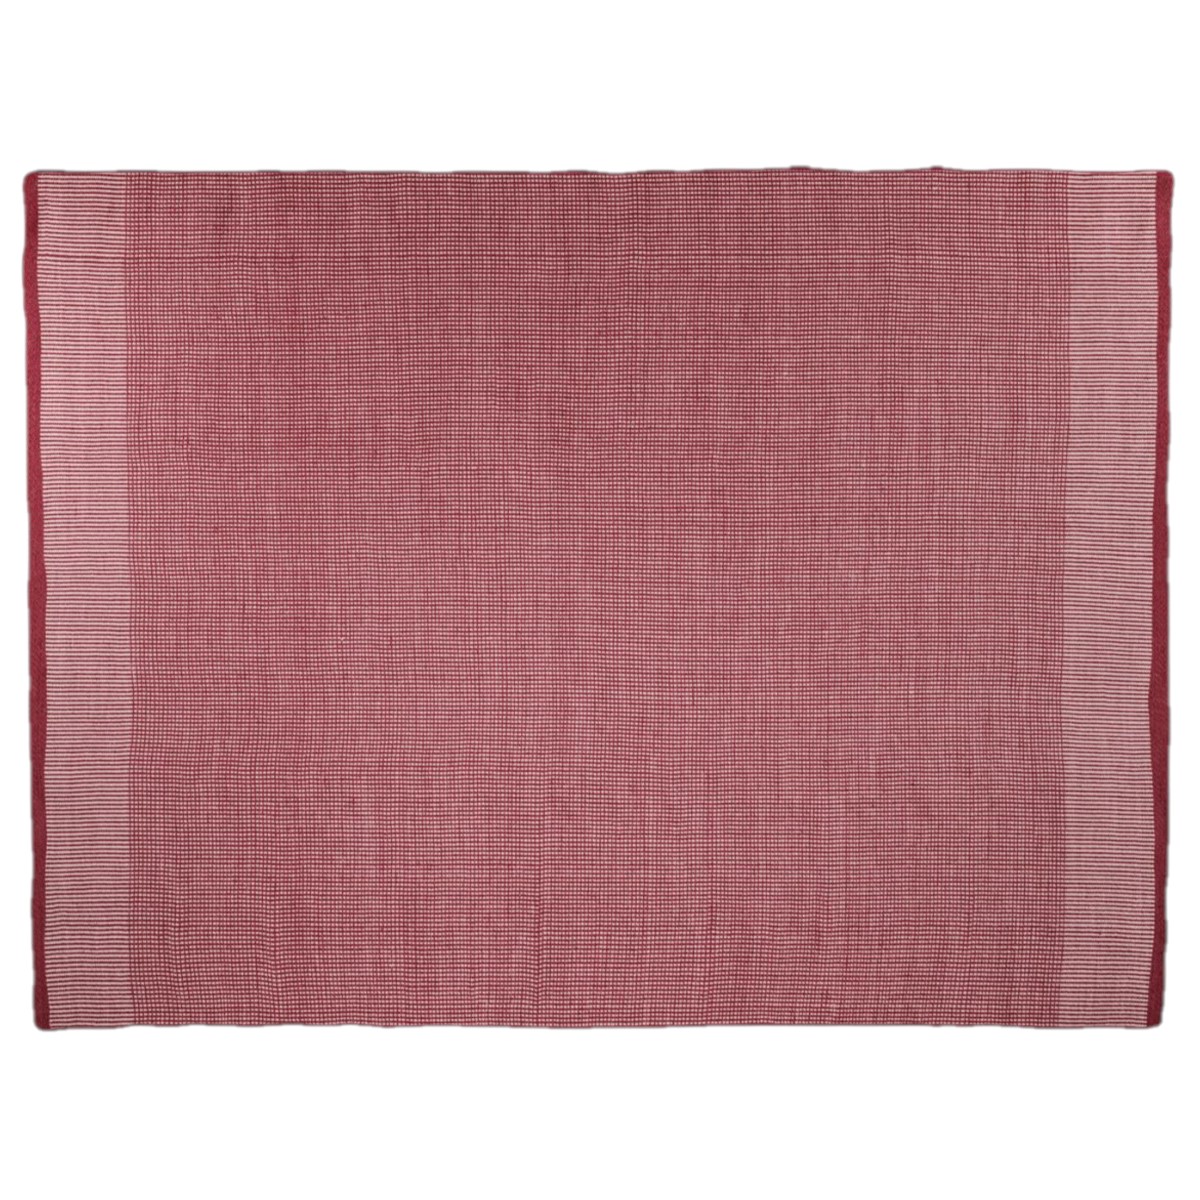 Kettal Block Moss Pink 4x3 | Hundred Mile Home New York